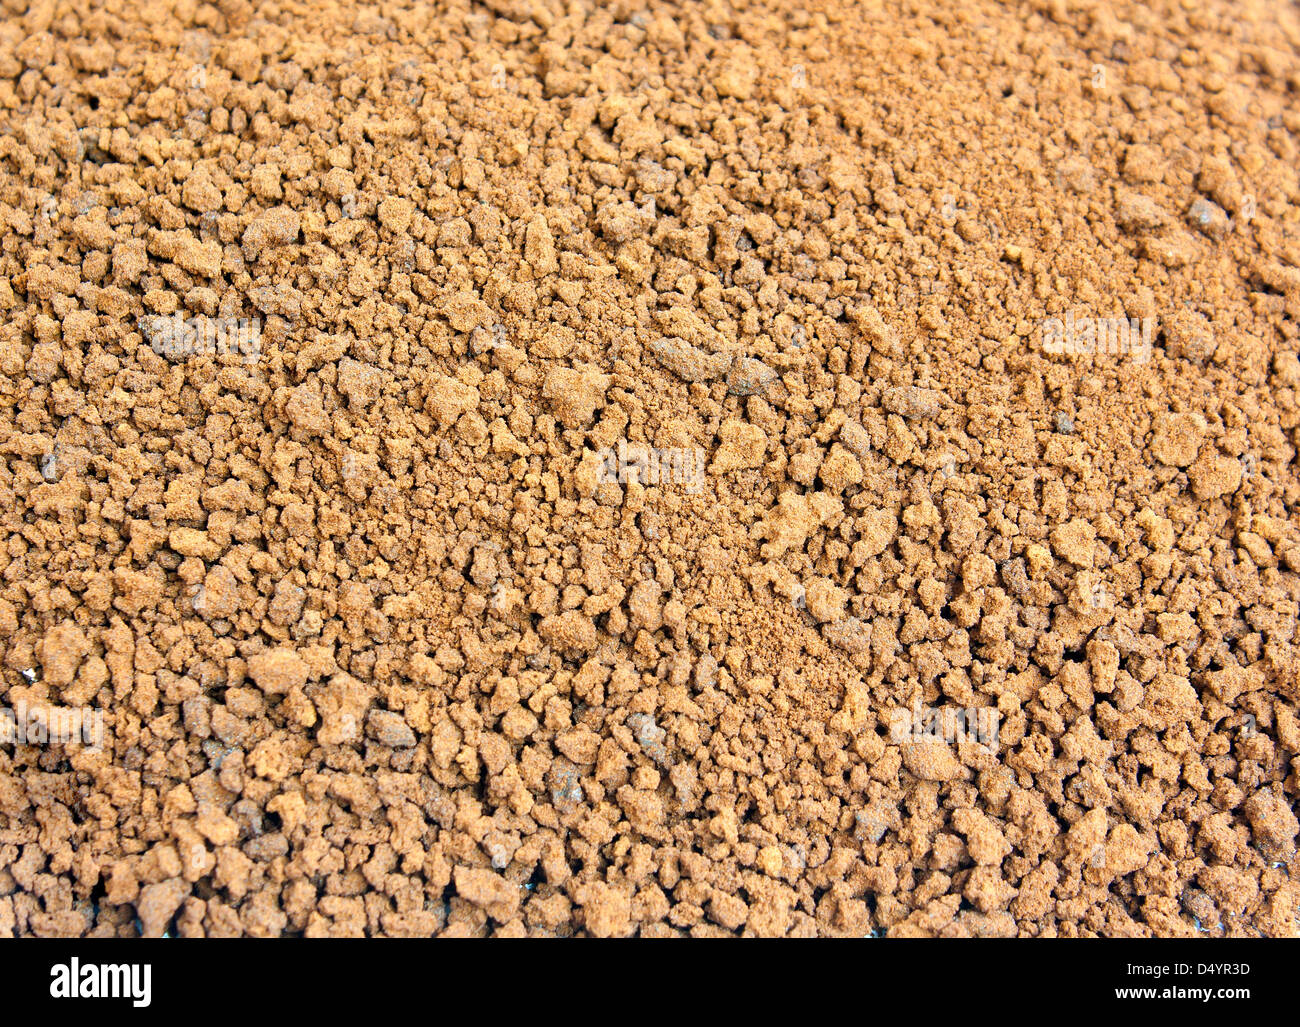 Profile grinding grain brown coffee beans background. Stock Photo